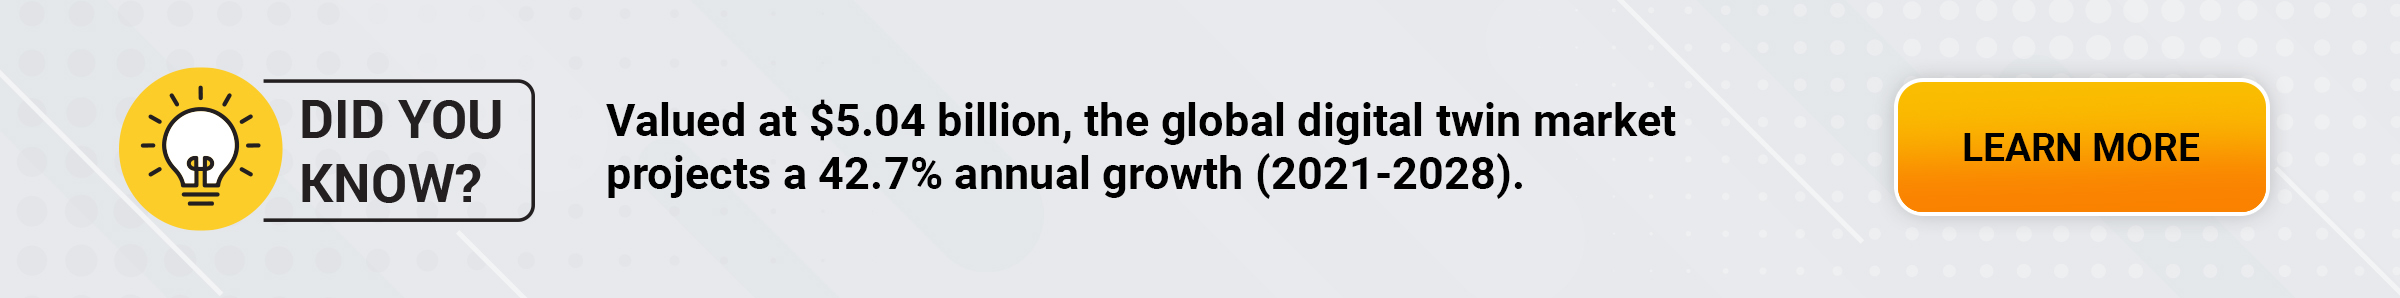 Valued at $5.04 billion, the global digital twin market projects a 42.7% annual growth (2021-2028).